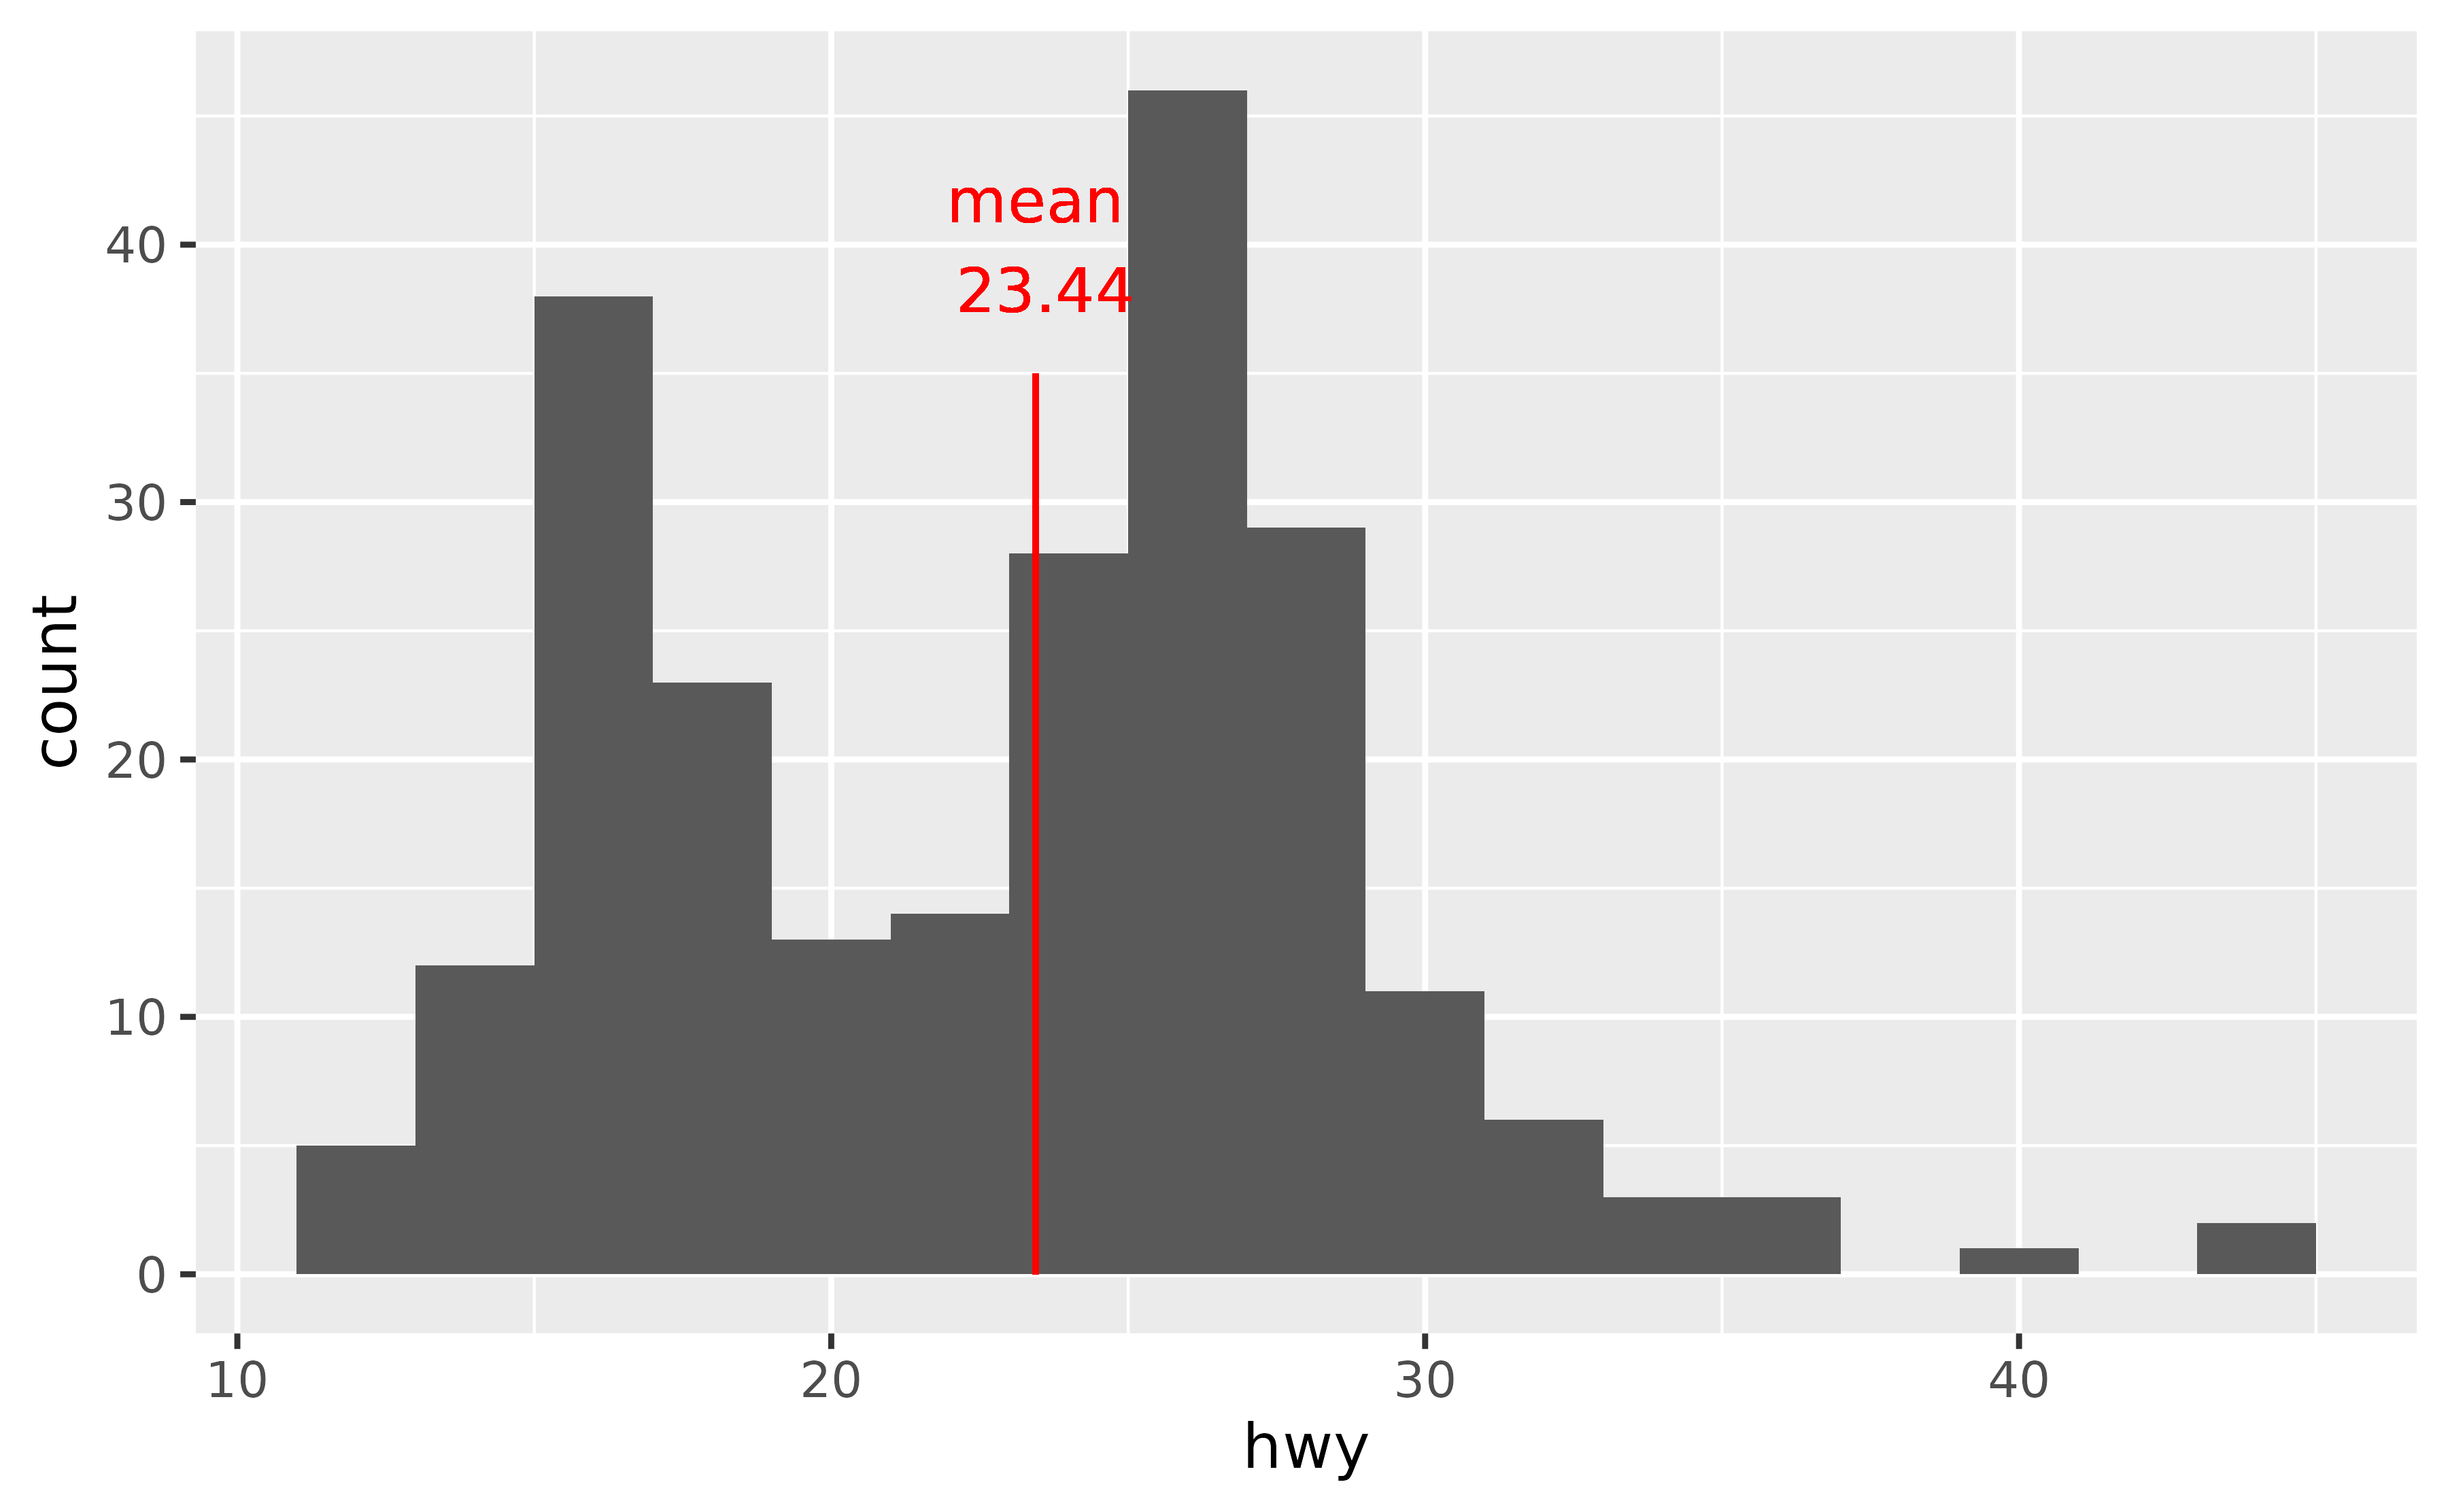 Histogram of highway miles per gallon for 234 cars. A red line is placed at the position 23.44 and is adorned with the label 'mean 23.44'. Both the line and the text appear pixellated due to overplotting.